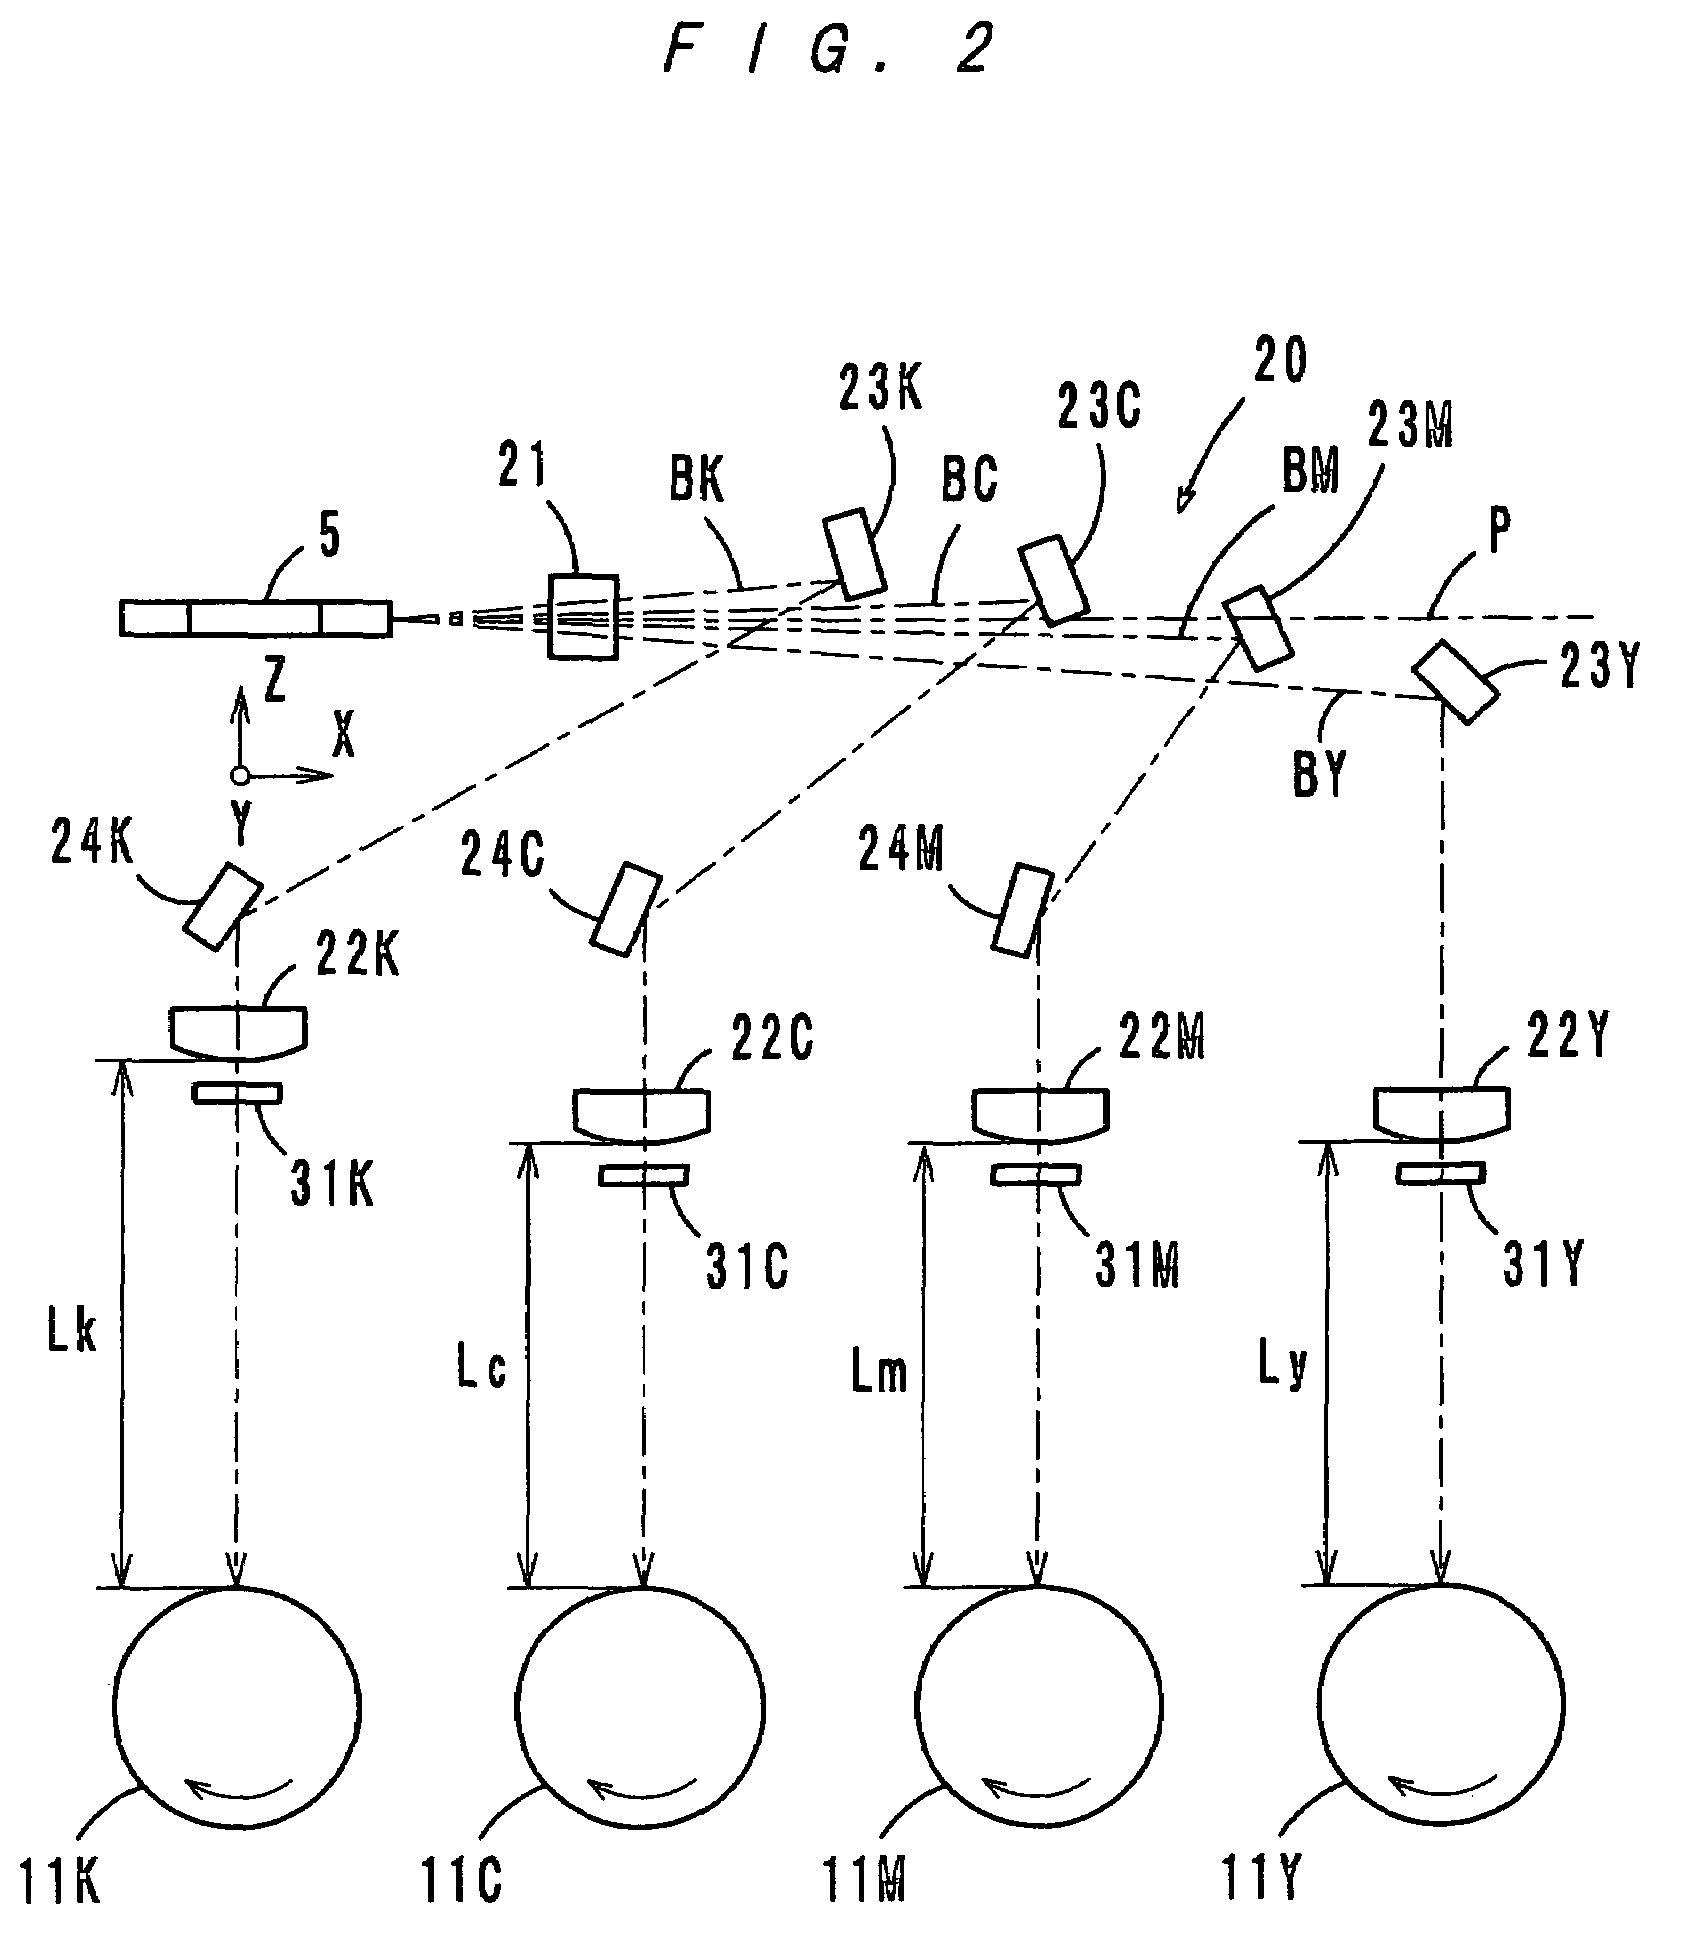 Laser scanning optical apparatus having exclusive optical elements at varying distances from receiving surfaces